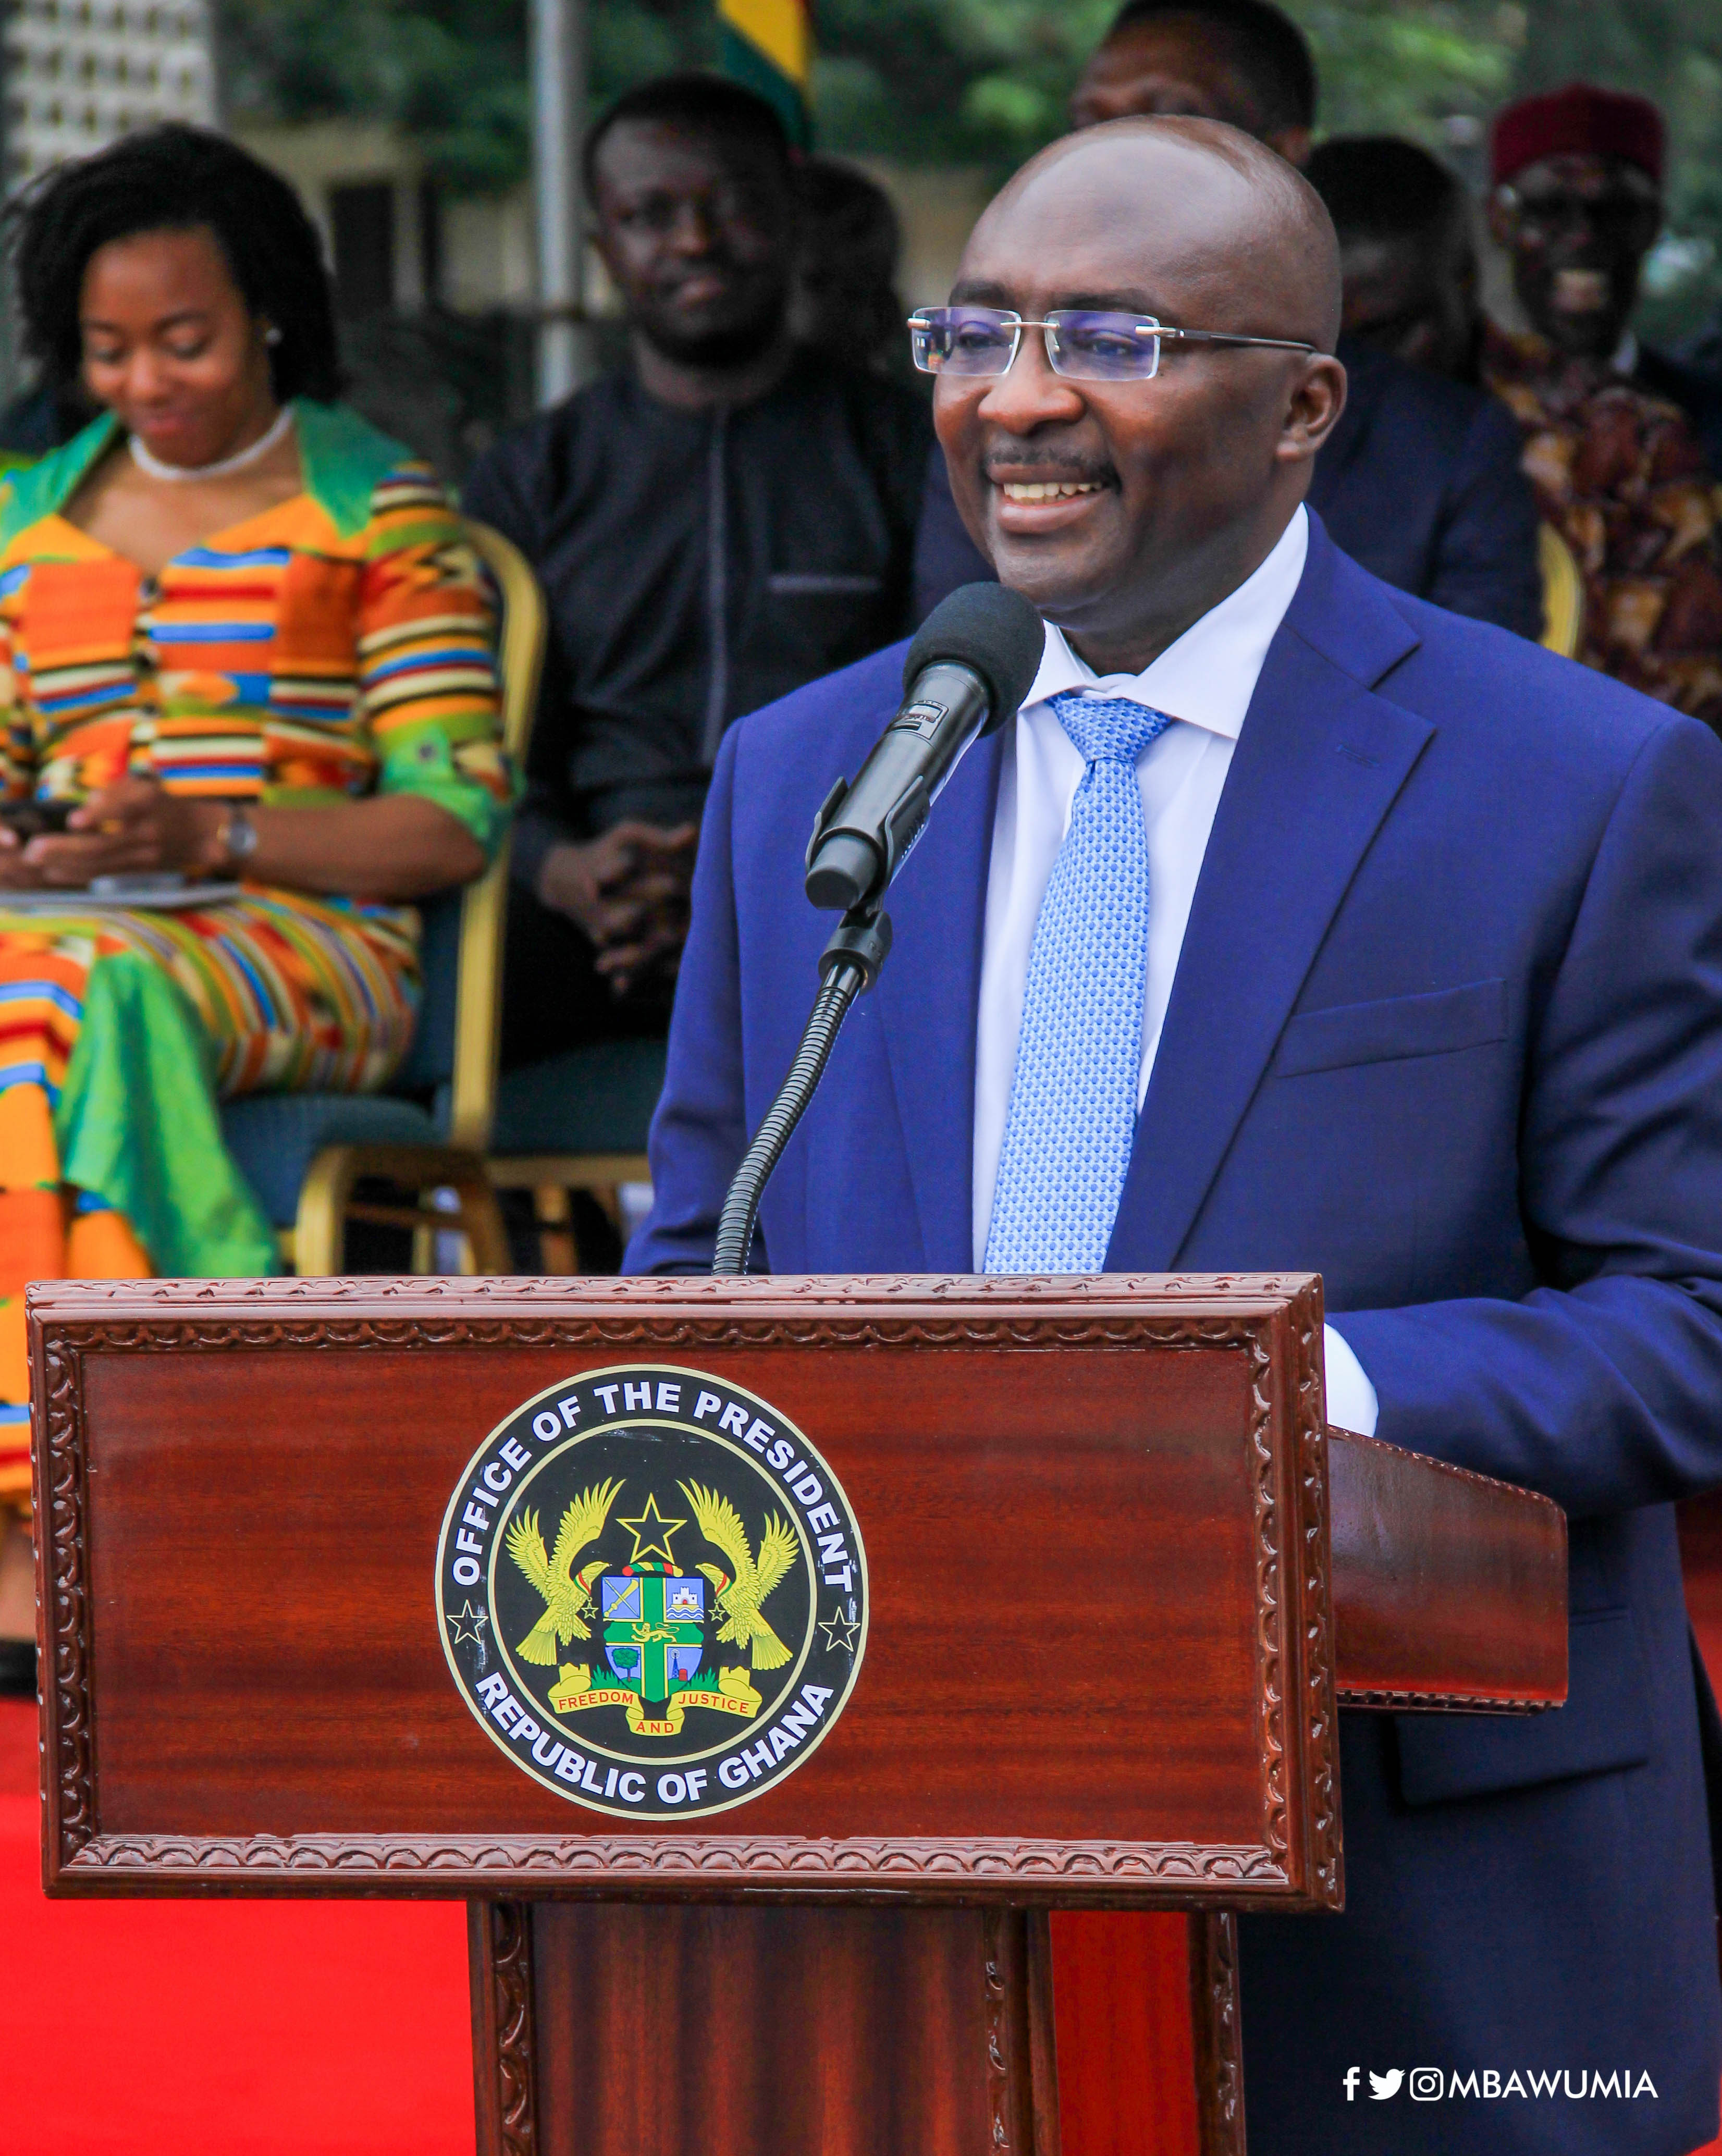 Our government has achieved a lot inspite of challenges – Bawumia